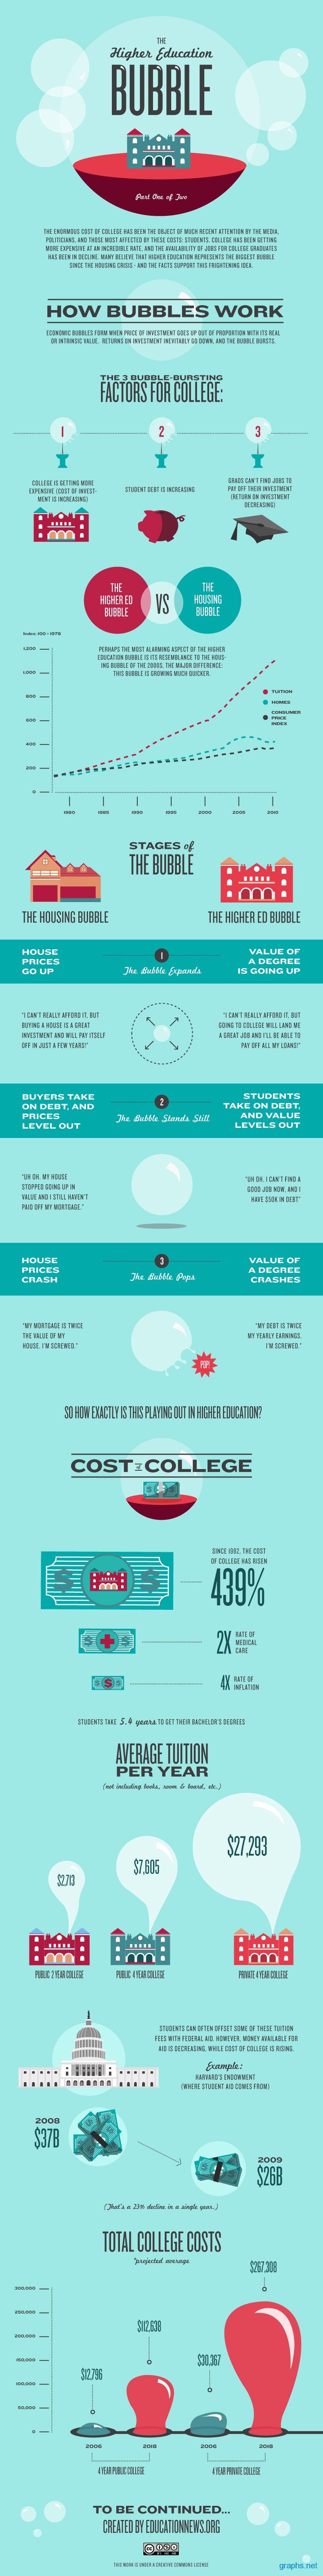 higher education bubble infographic